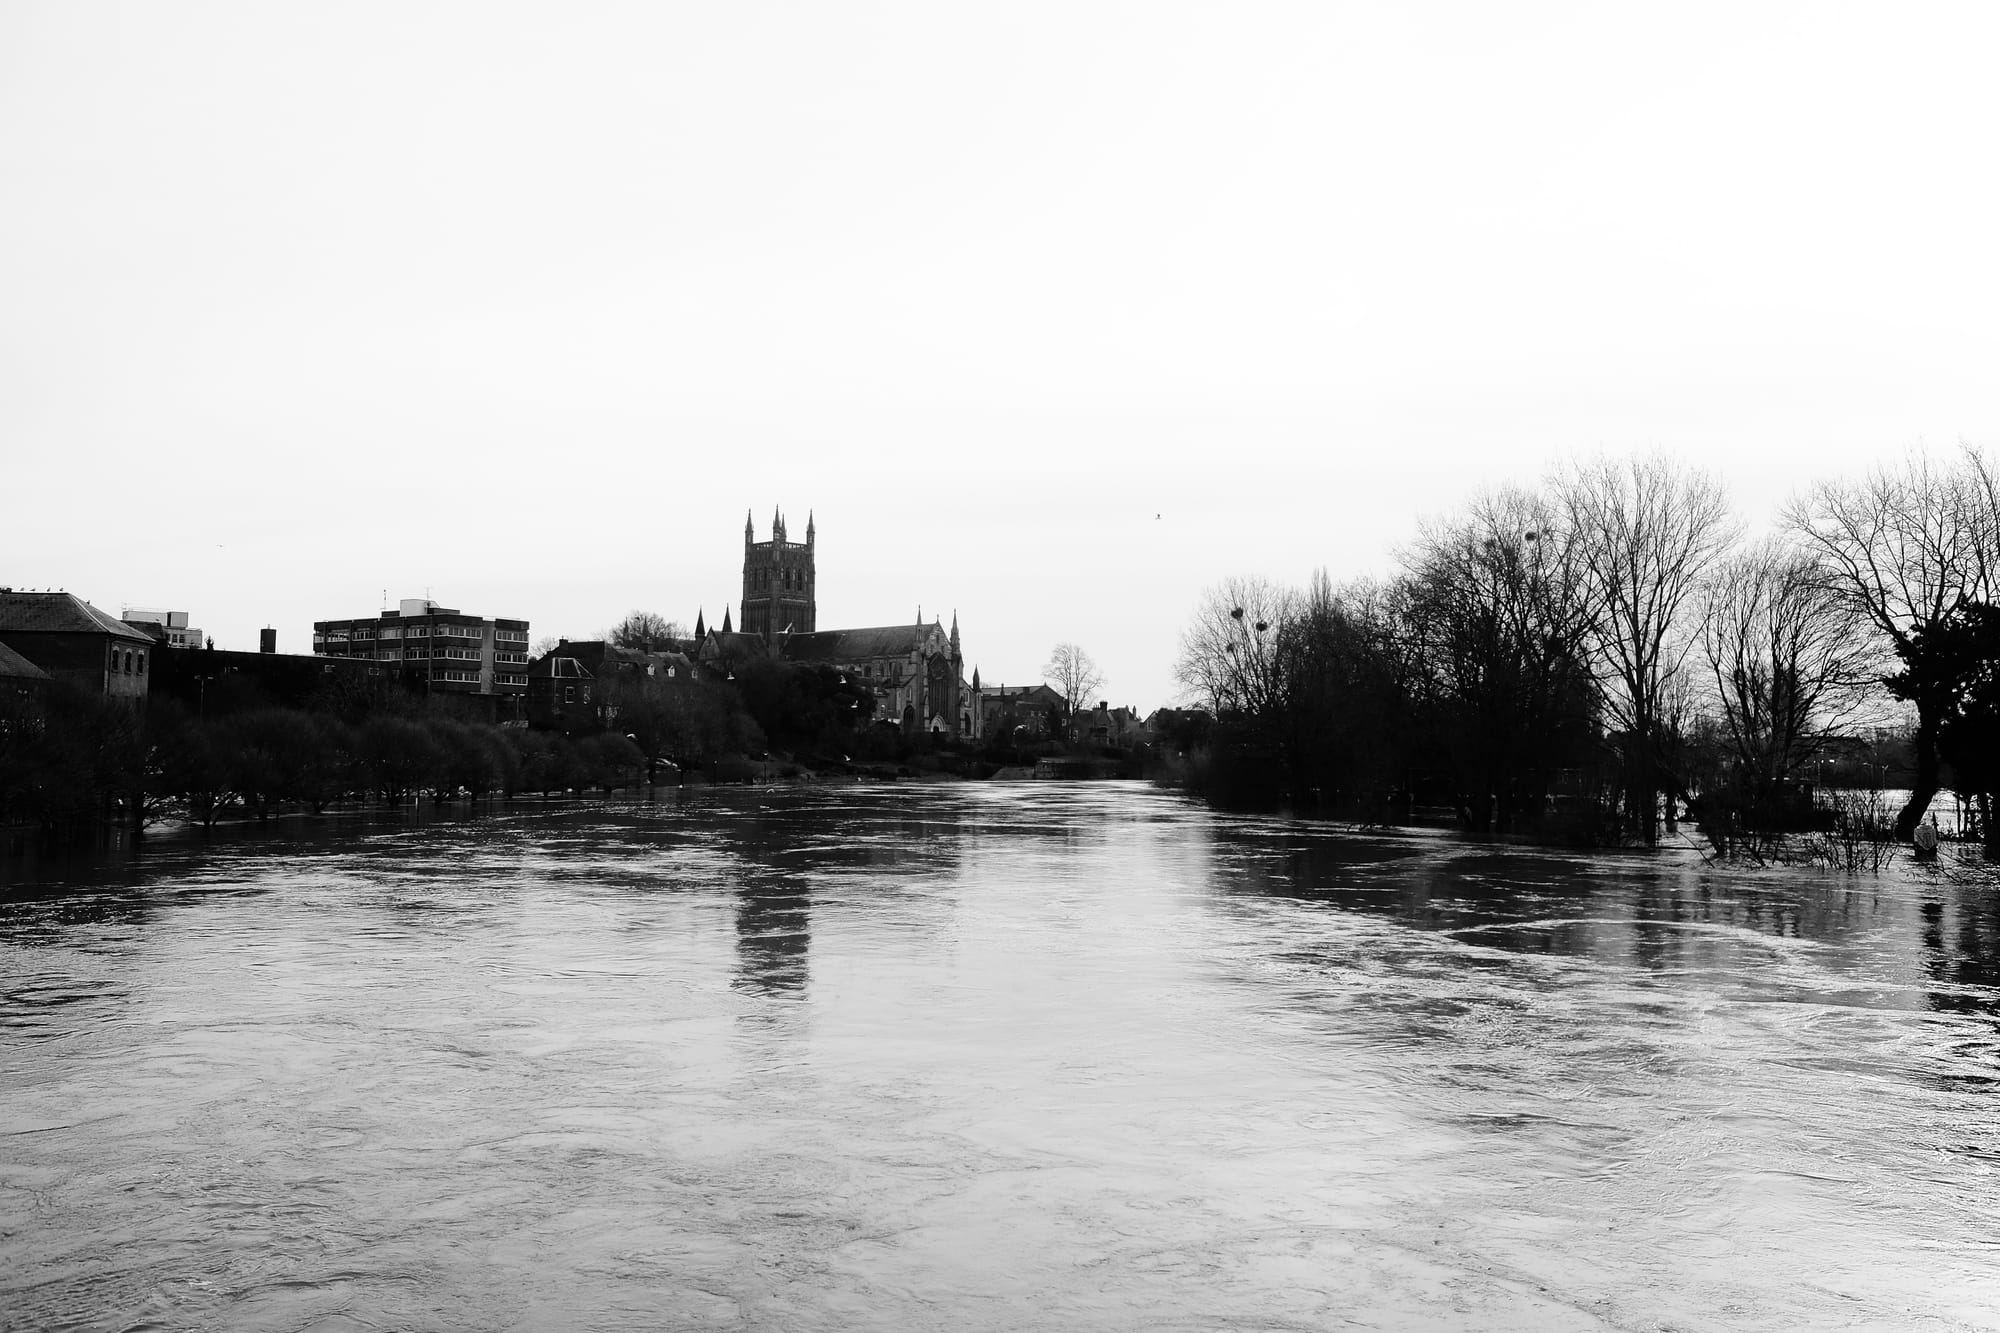 A black and white image of the flooded River Severn, Worcester Cathedral in the background